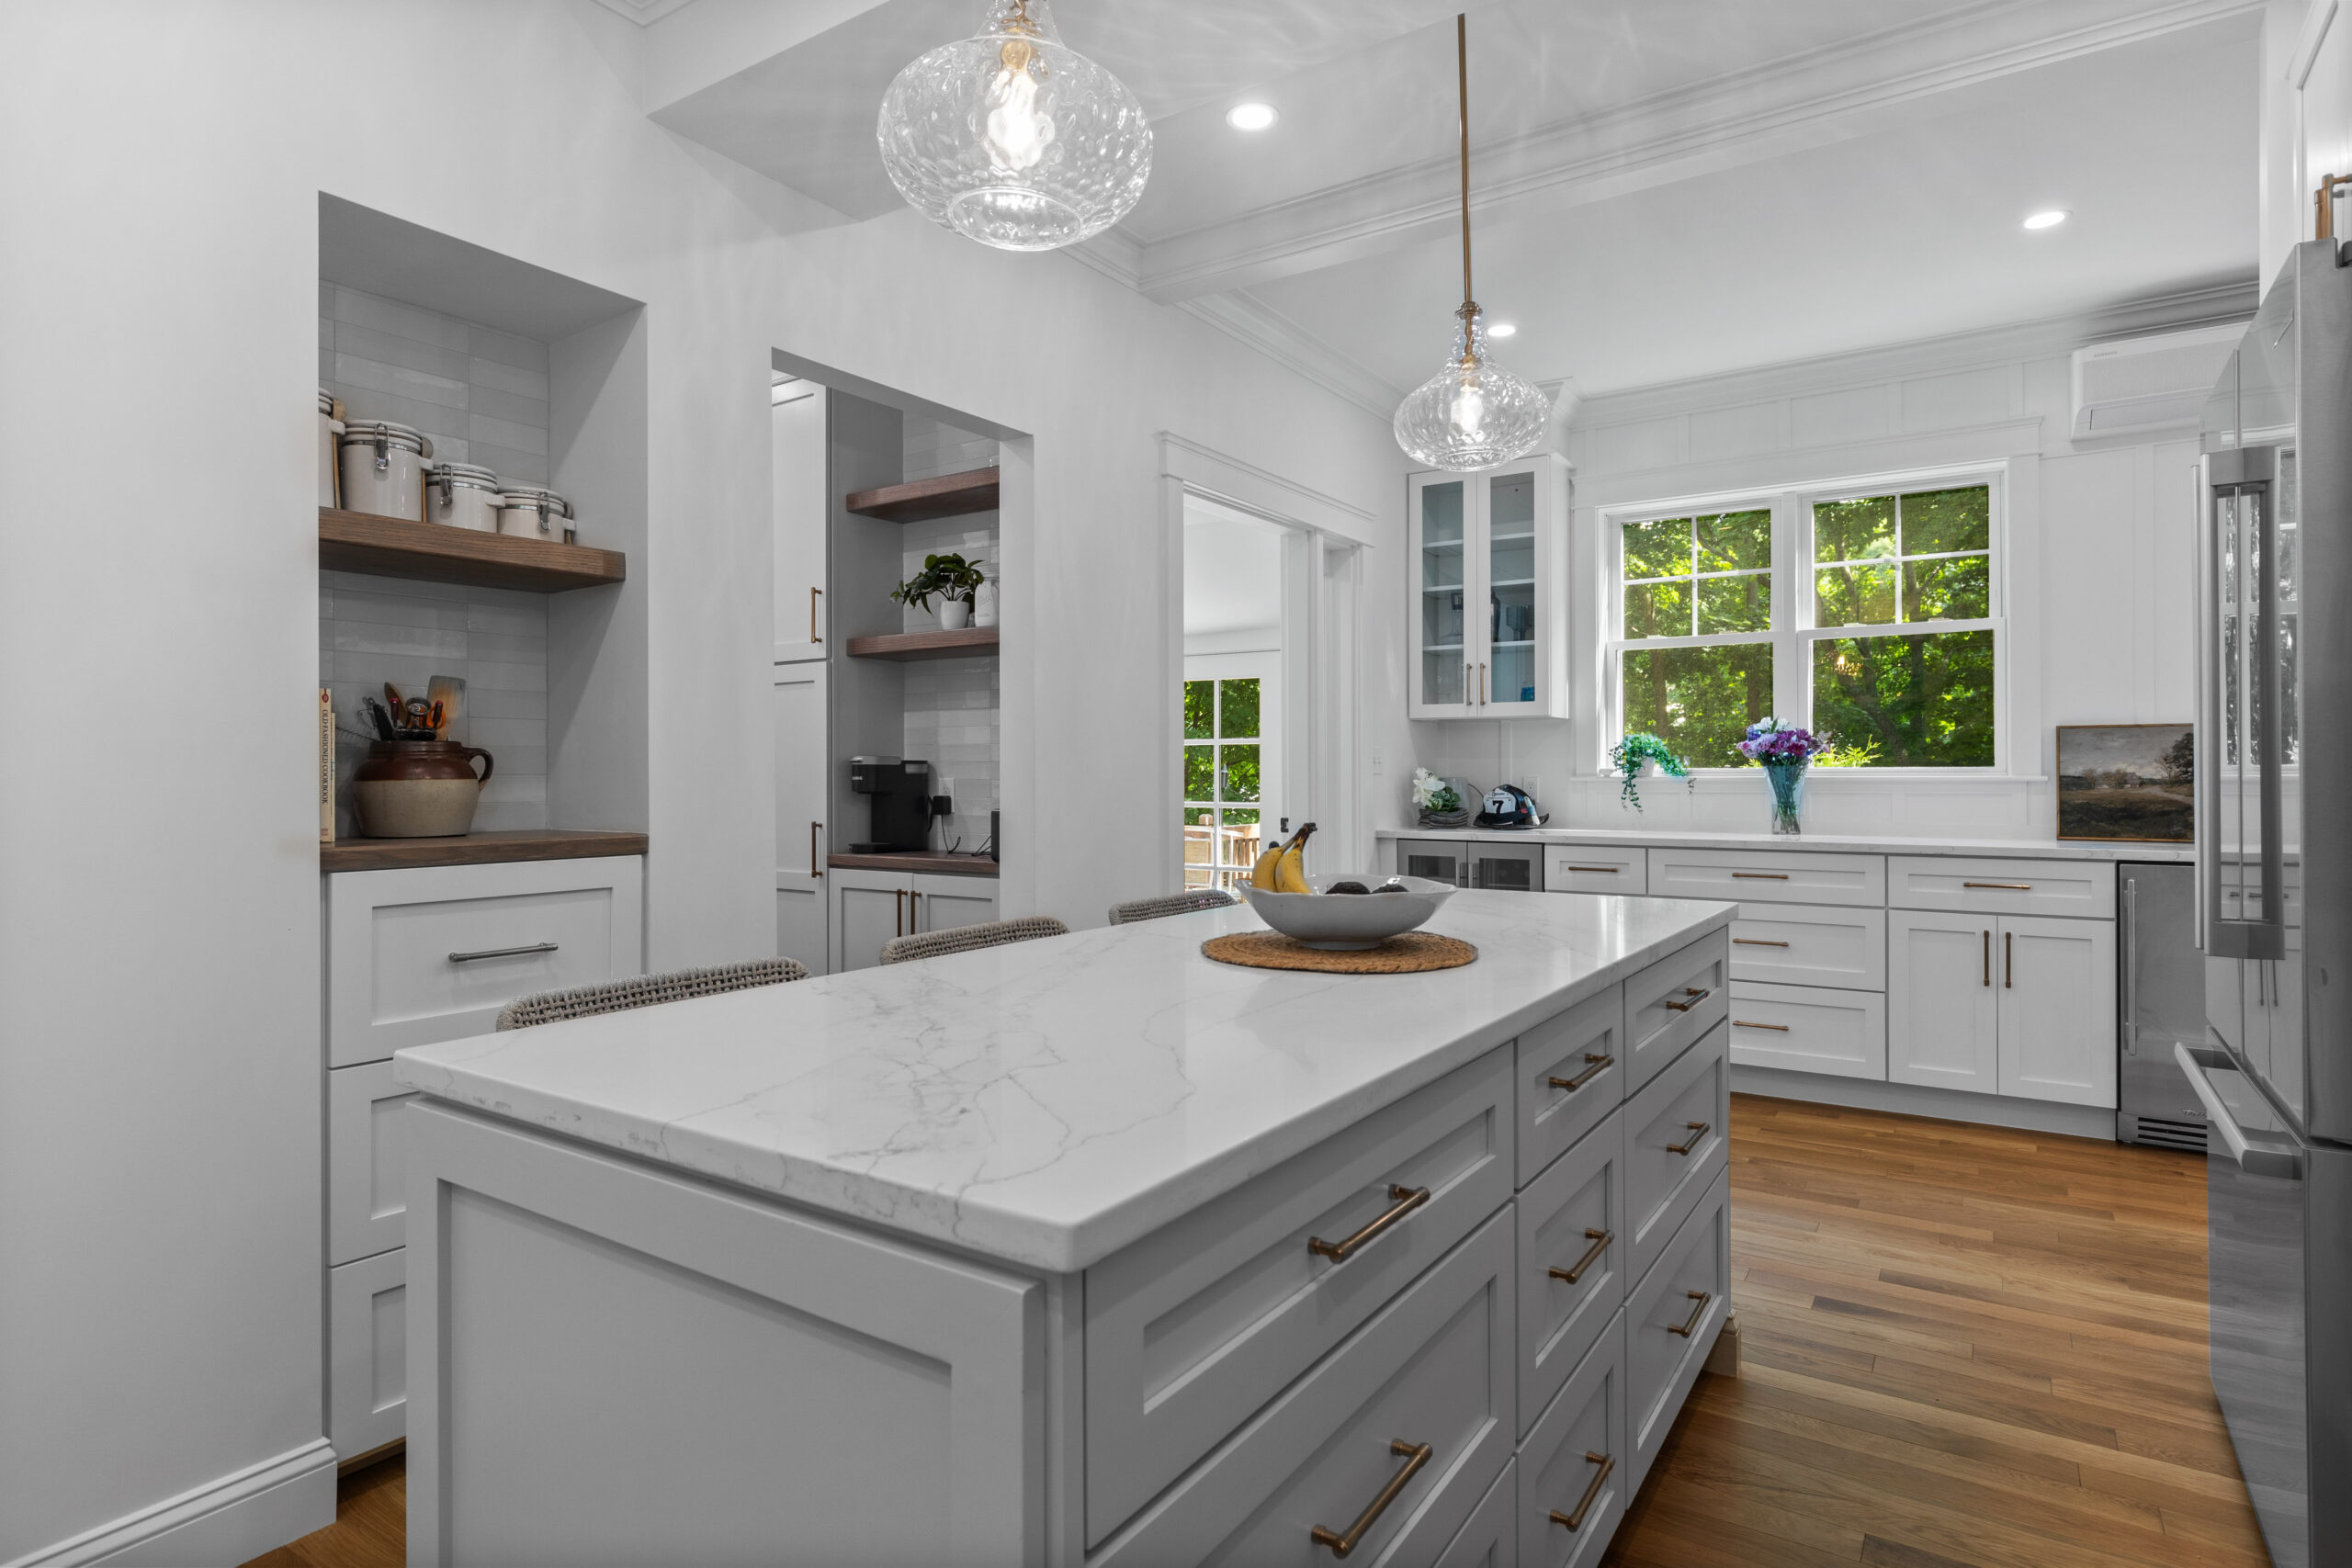 Image of a newly renovated kitchen in a vintage New England home, highlighting the long countertop with white cabinetry and brass hardware. The bright and airy kitchen opens up to a sunroom, which has comfortable seating and large windows that bring in plenty of natural light. Fresh flowers and decorative items add a homely touch to the modern space